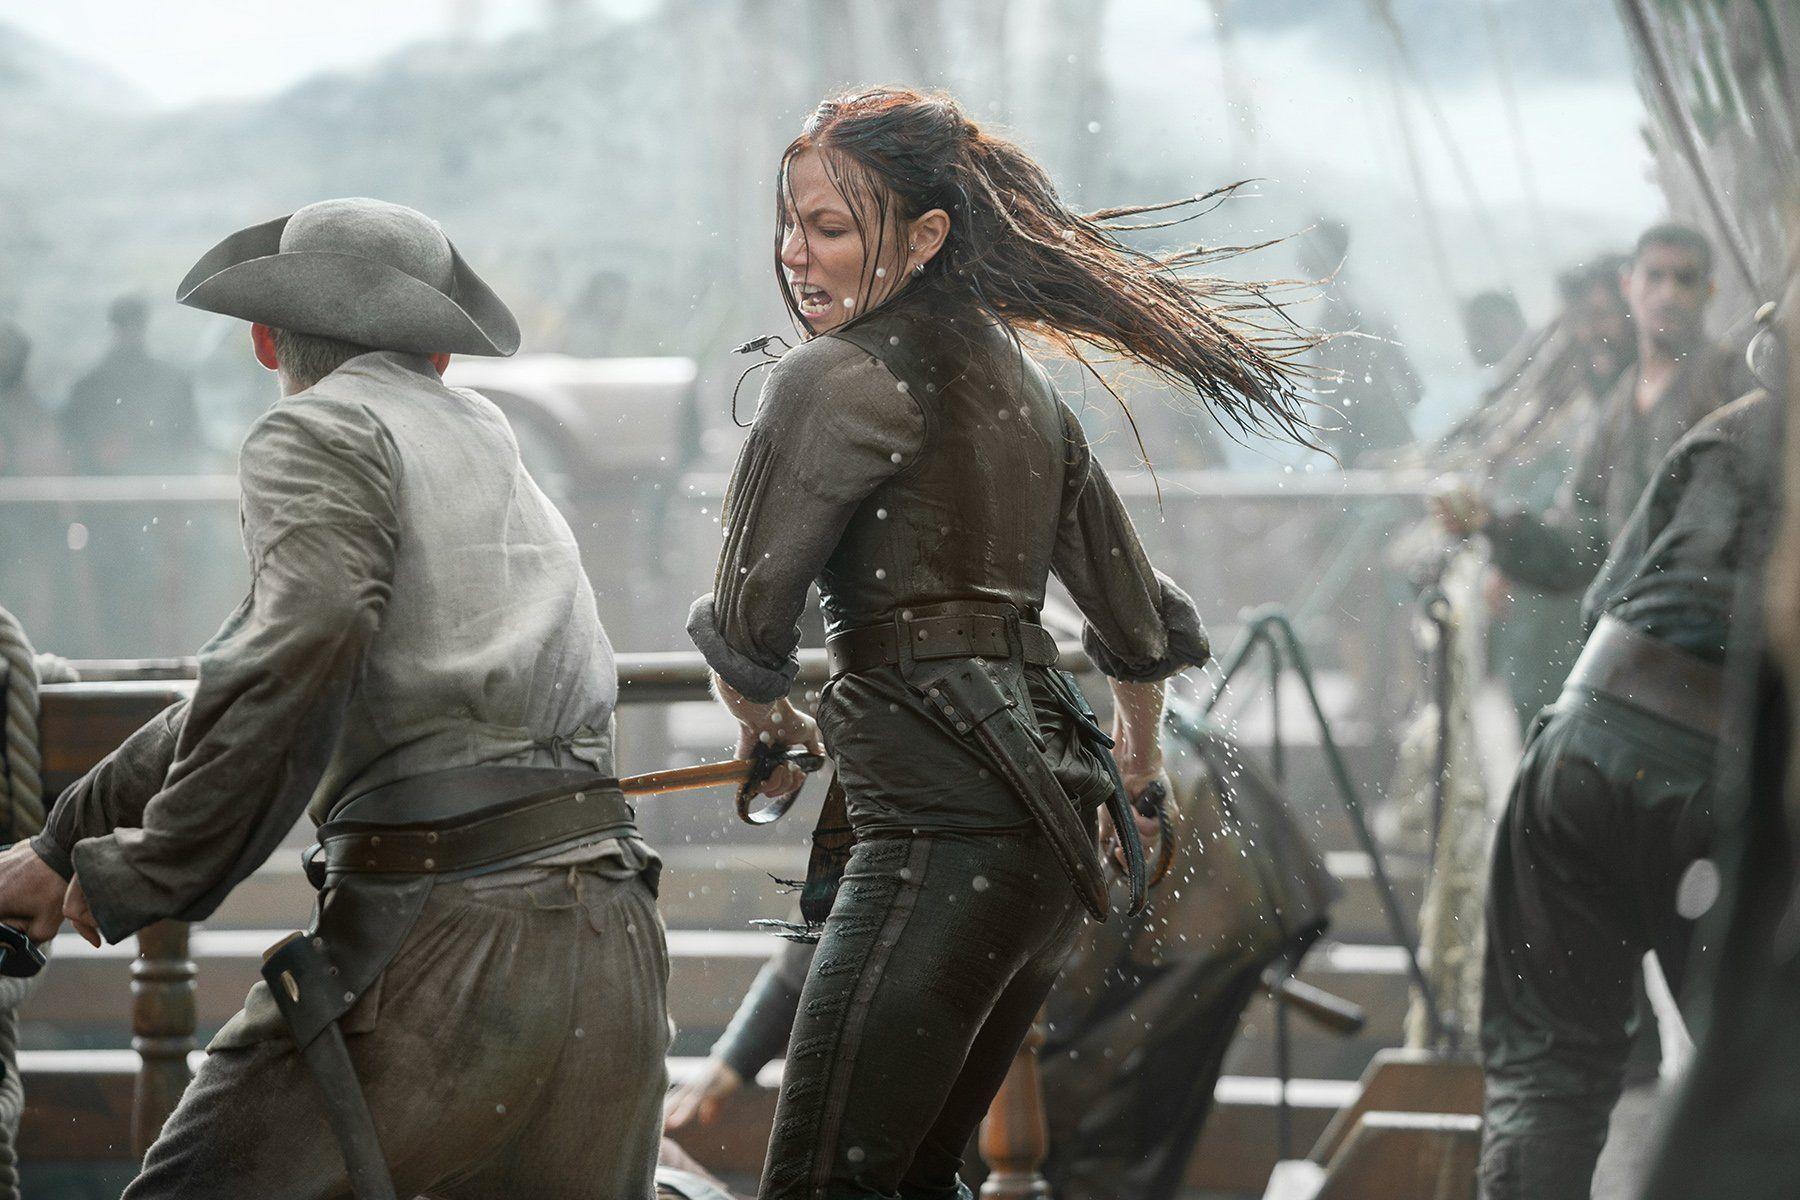 Best Anne Bonny image. Pirate life, Pirate woman